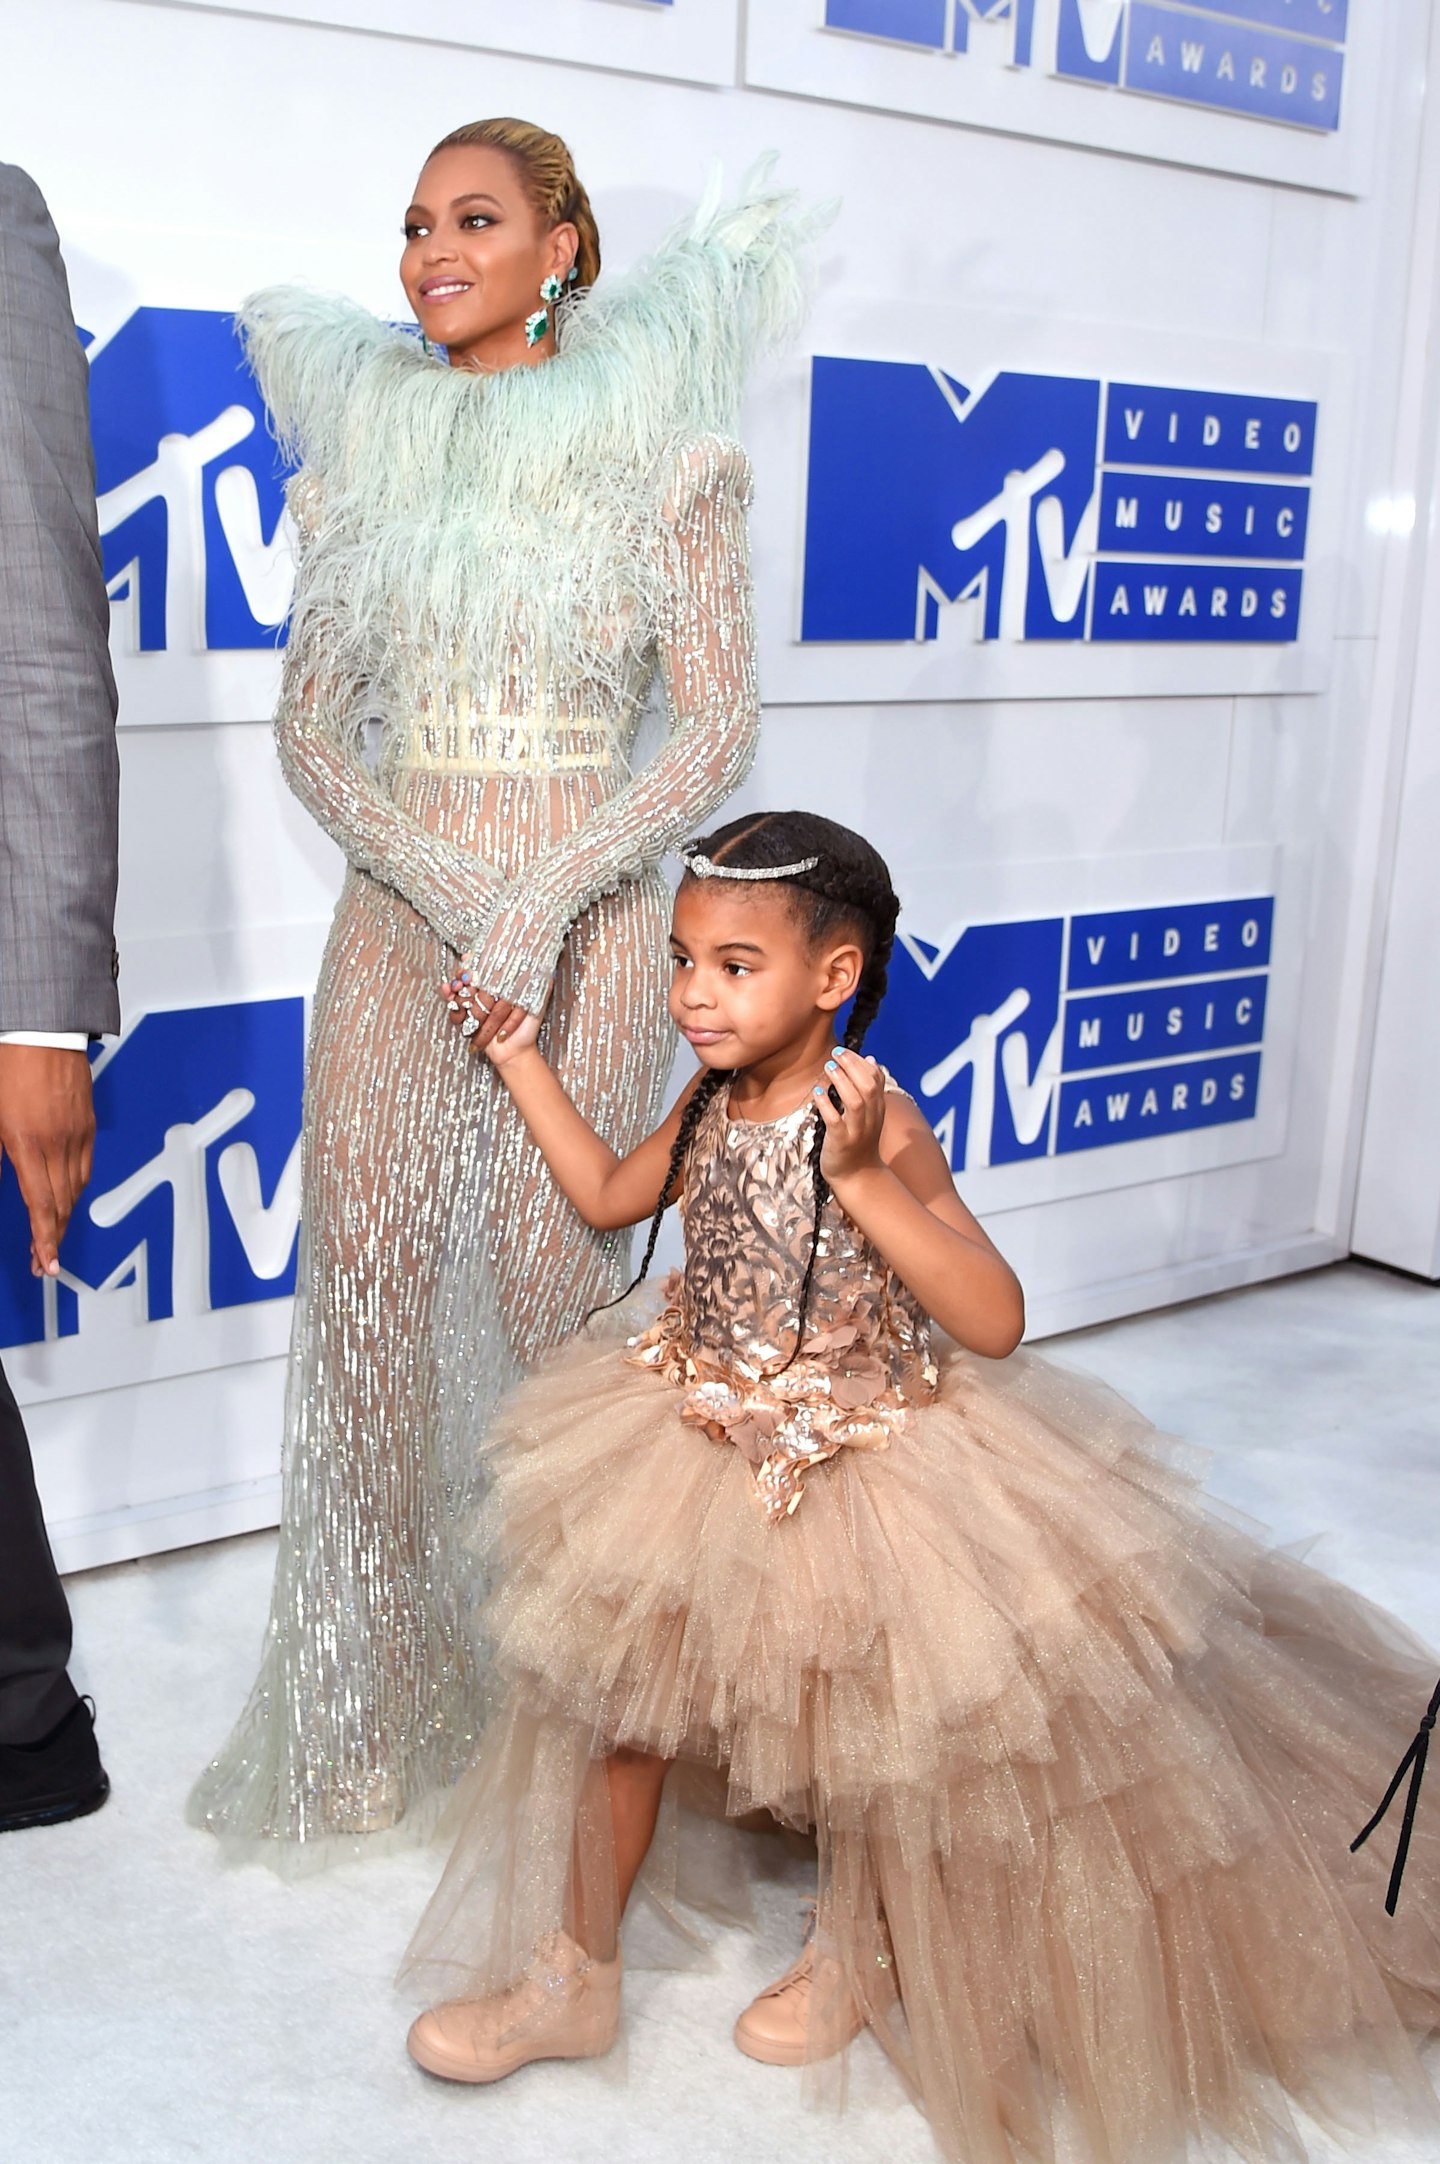 Beyonce and Daughter Blue Ivy attend VMAs in coordinating